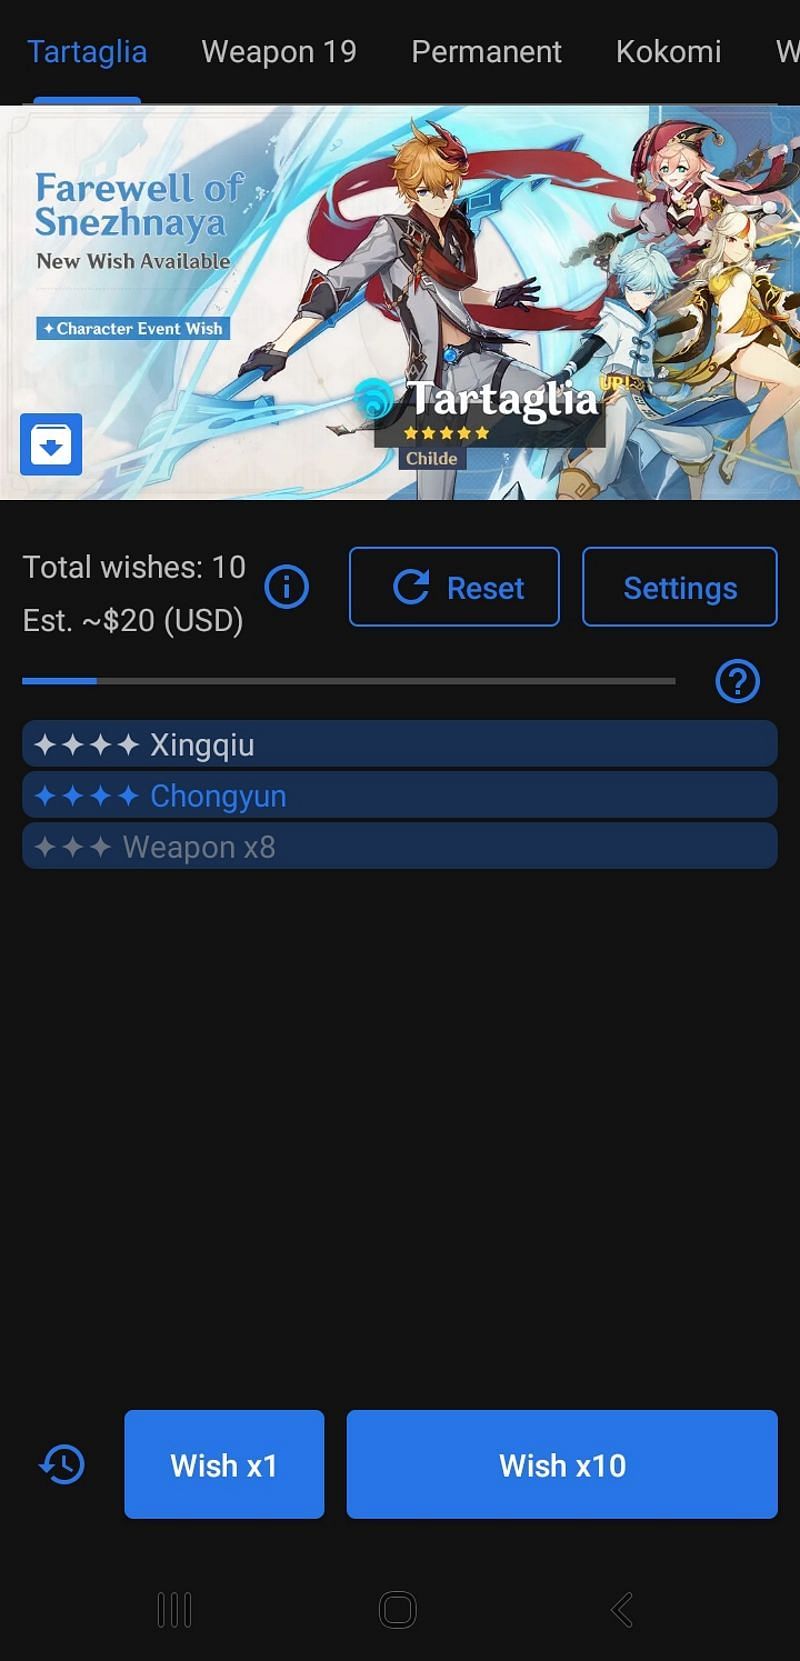 How the screen looks after ten wishes (Image via saihou)